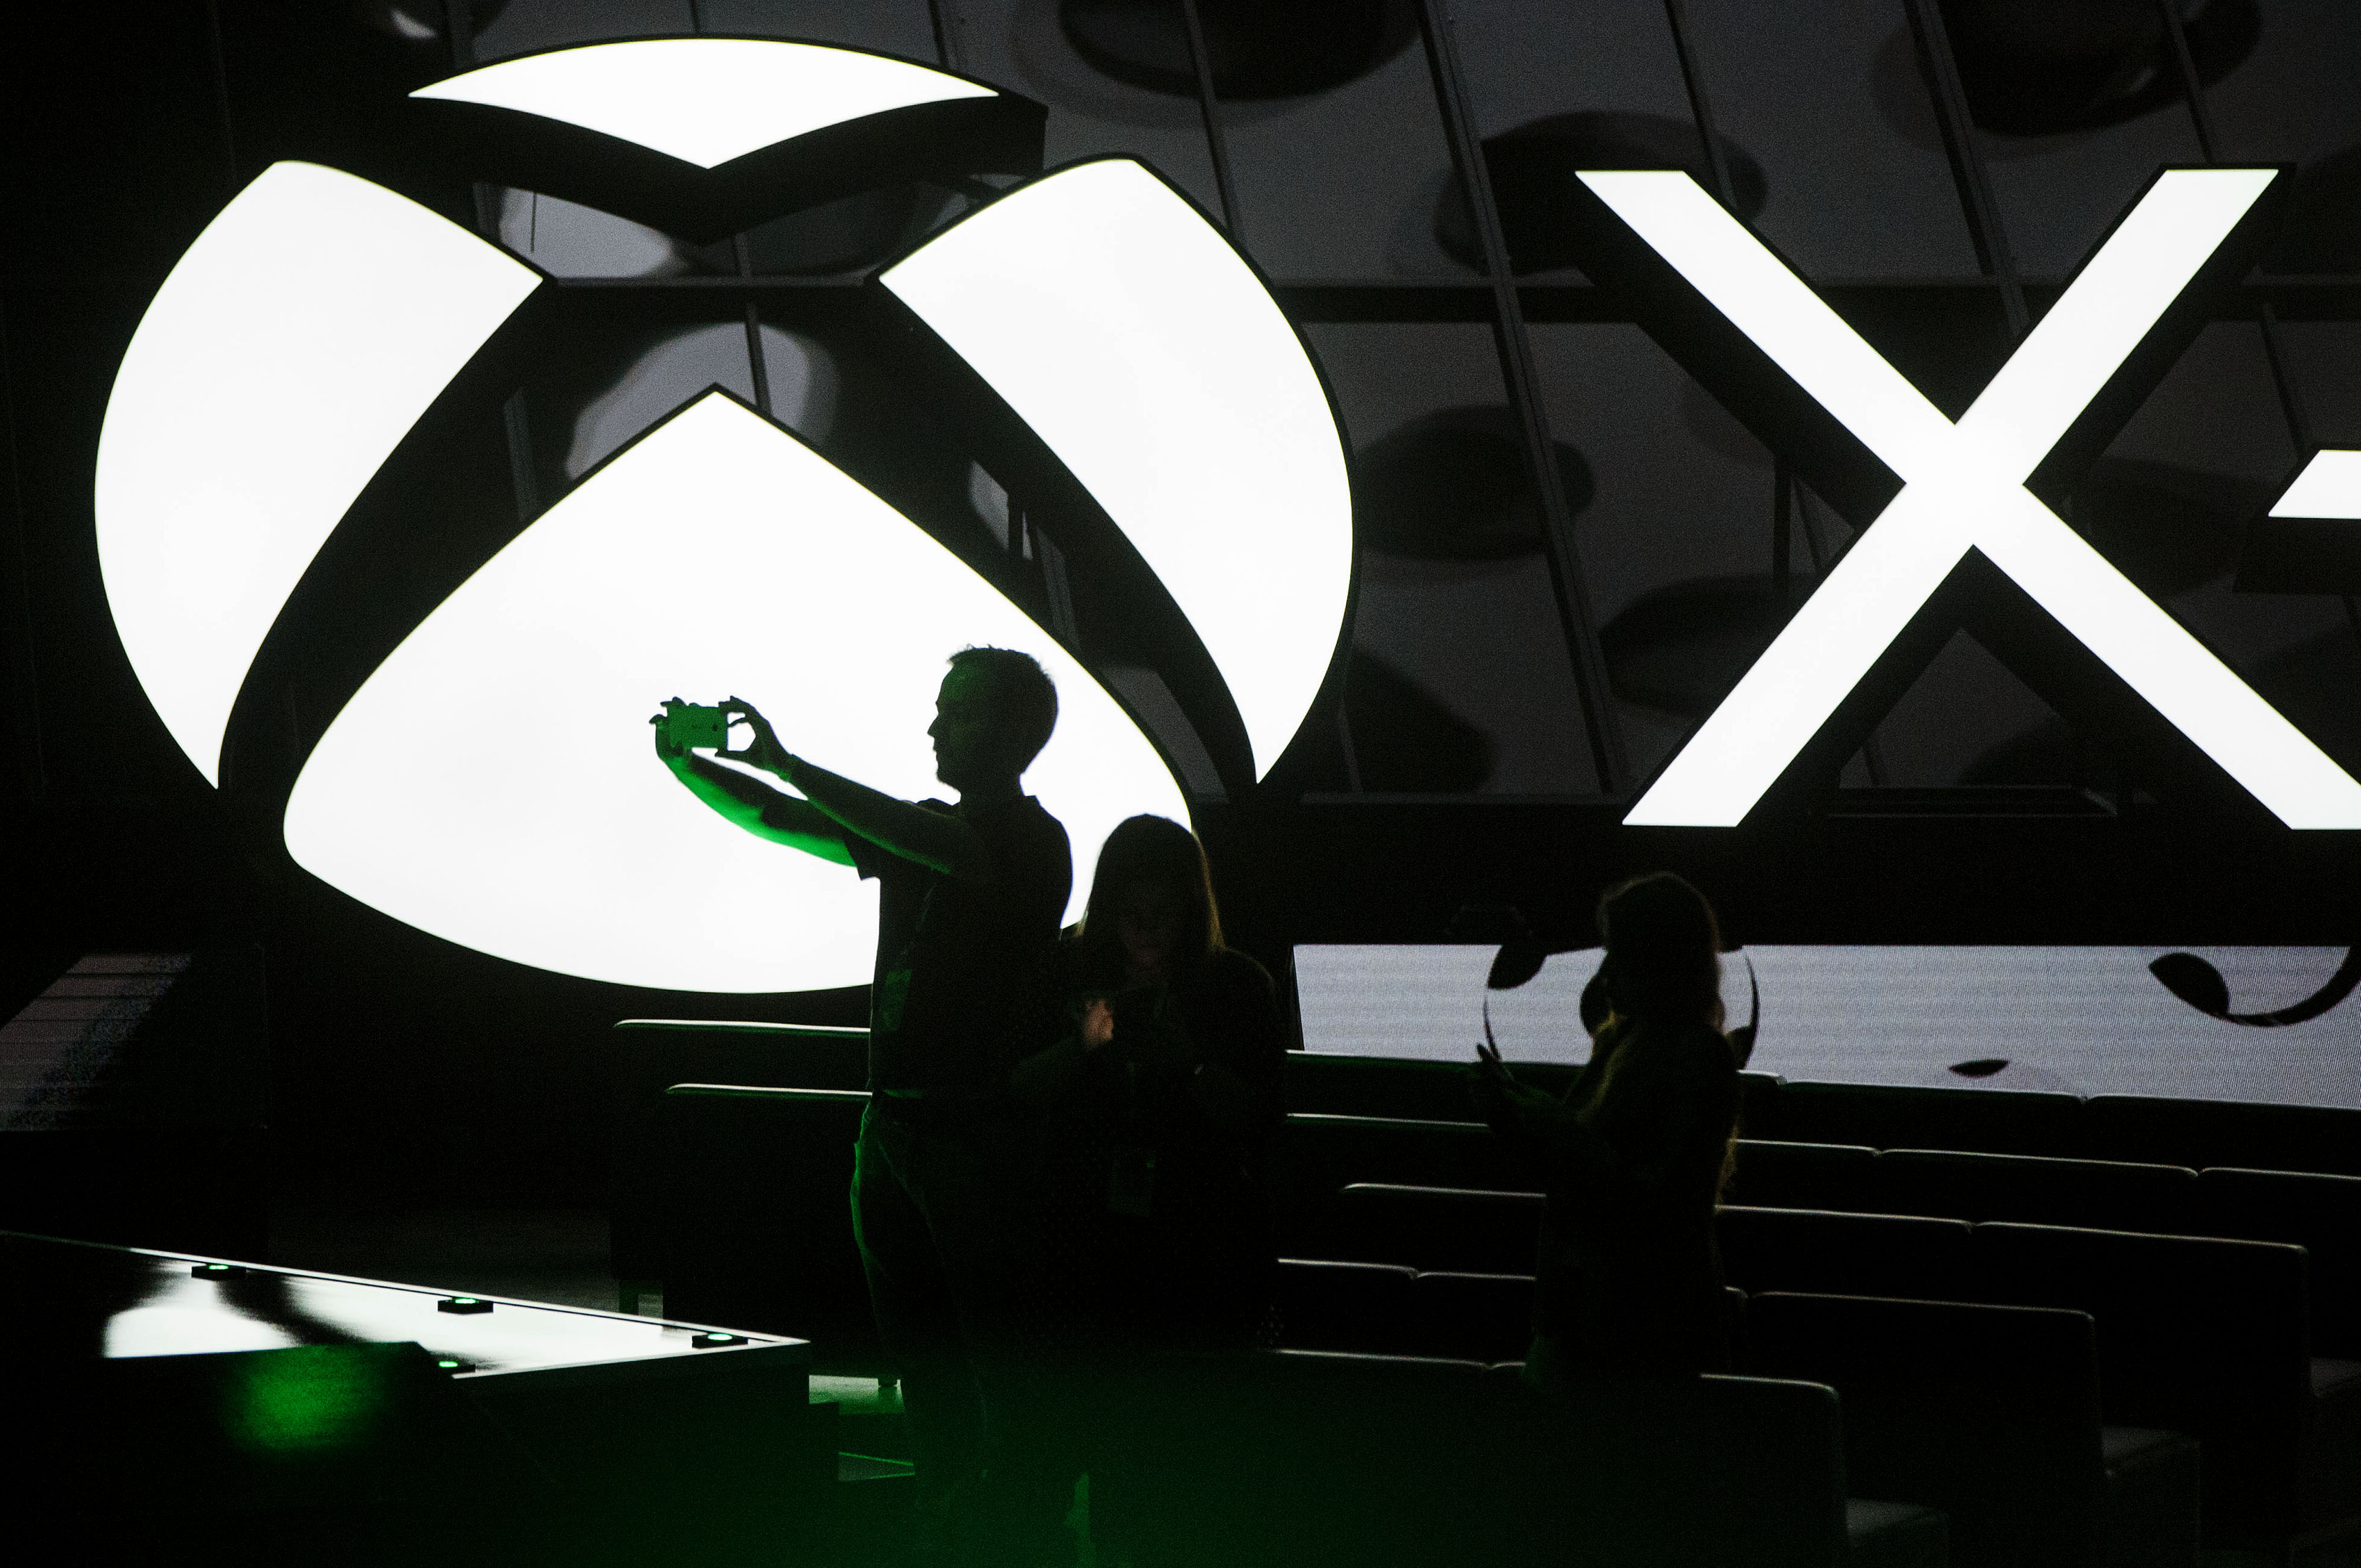 An attendee uses a mobile device to take a photograph before the Microsoft Corp. Xbox event ahead of the E3 Electronic Entertainment Expo in Los Angeles, California, U.S., on Monday, June 13, 2016. (Bloomberg&mdash;Bloomberg via Getty Images)